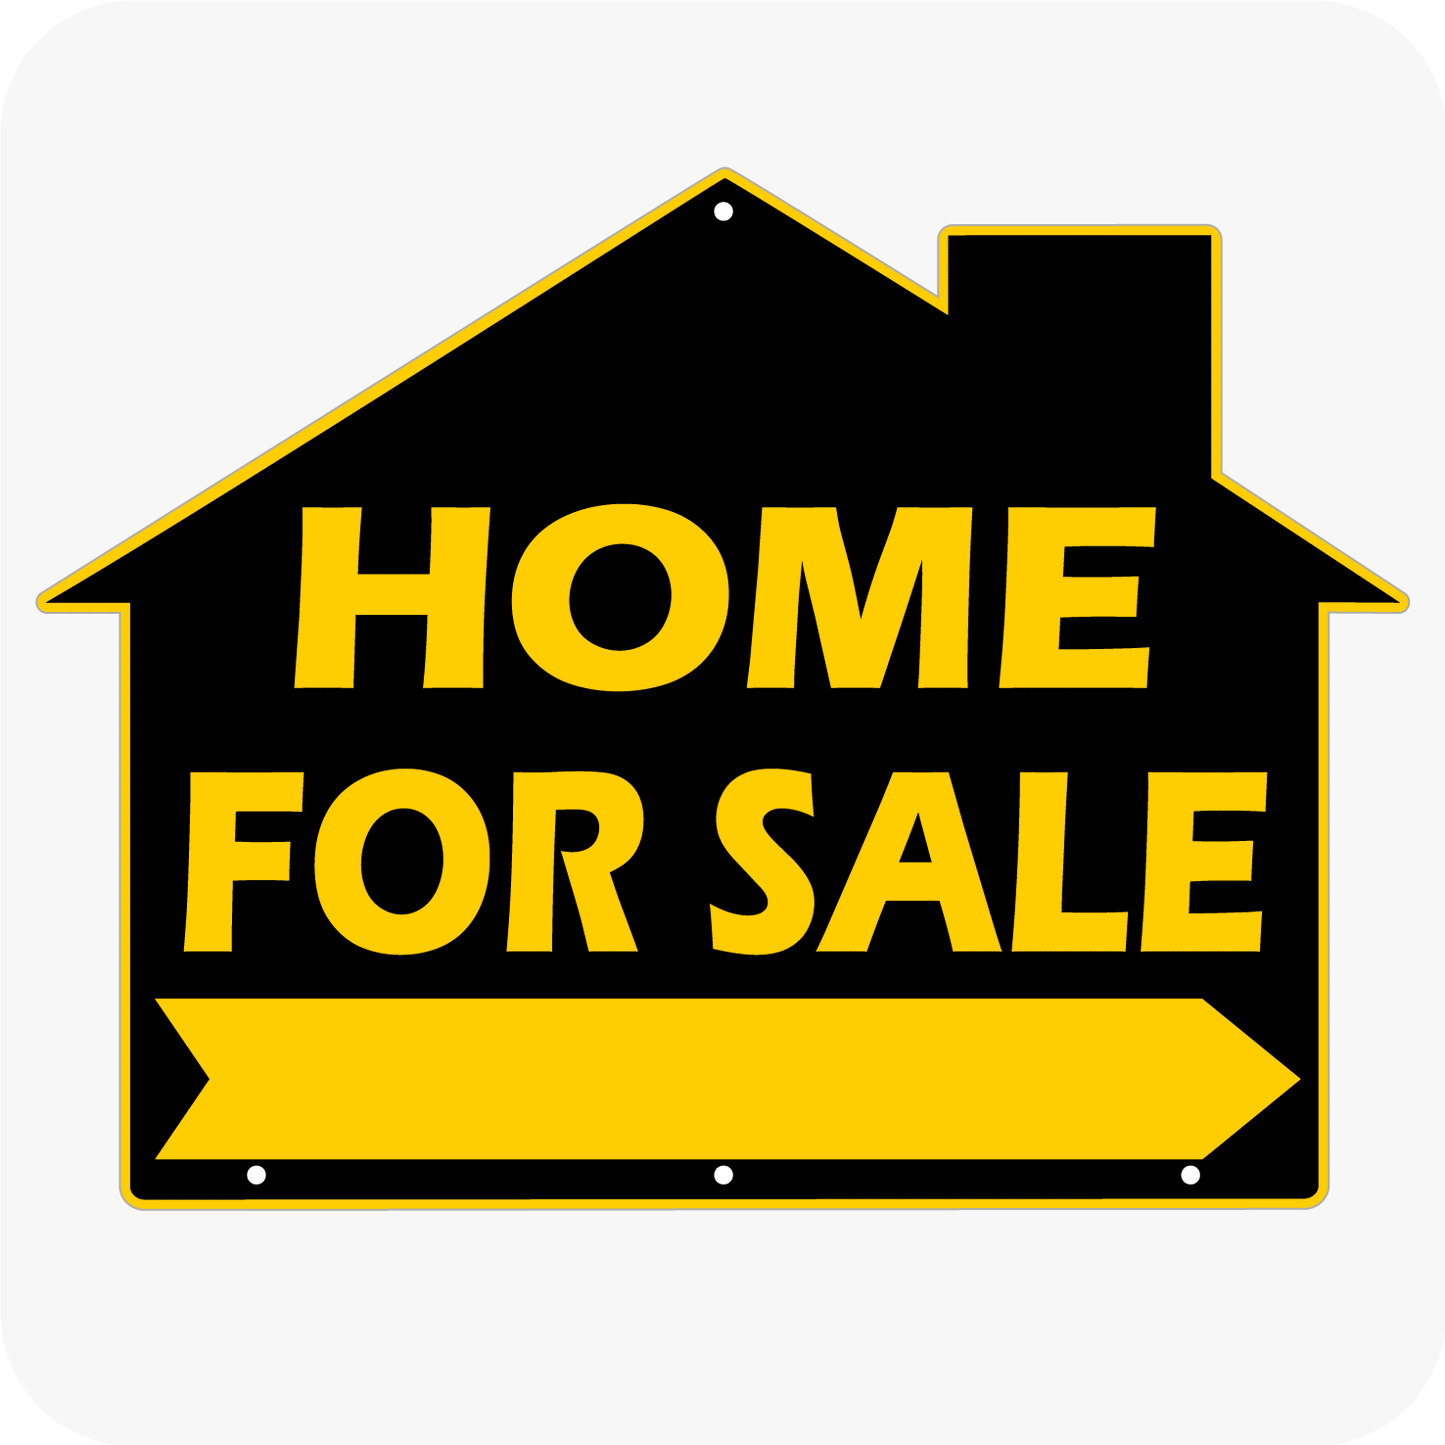 Home For Sale - House Shaped Sign 18x24 - Black and Yellow